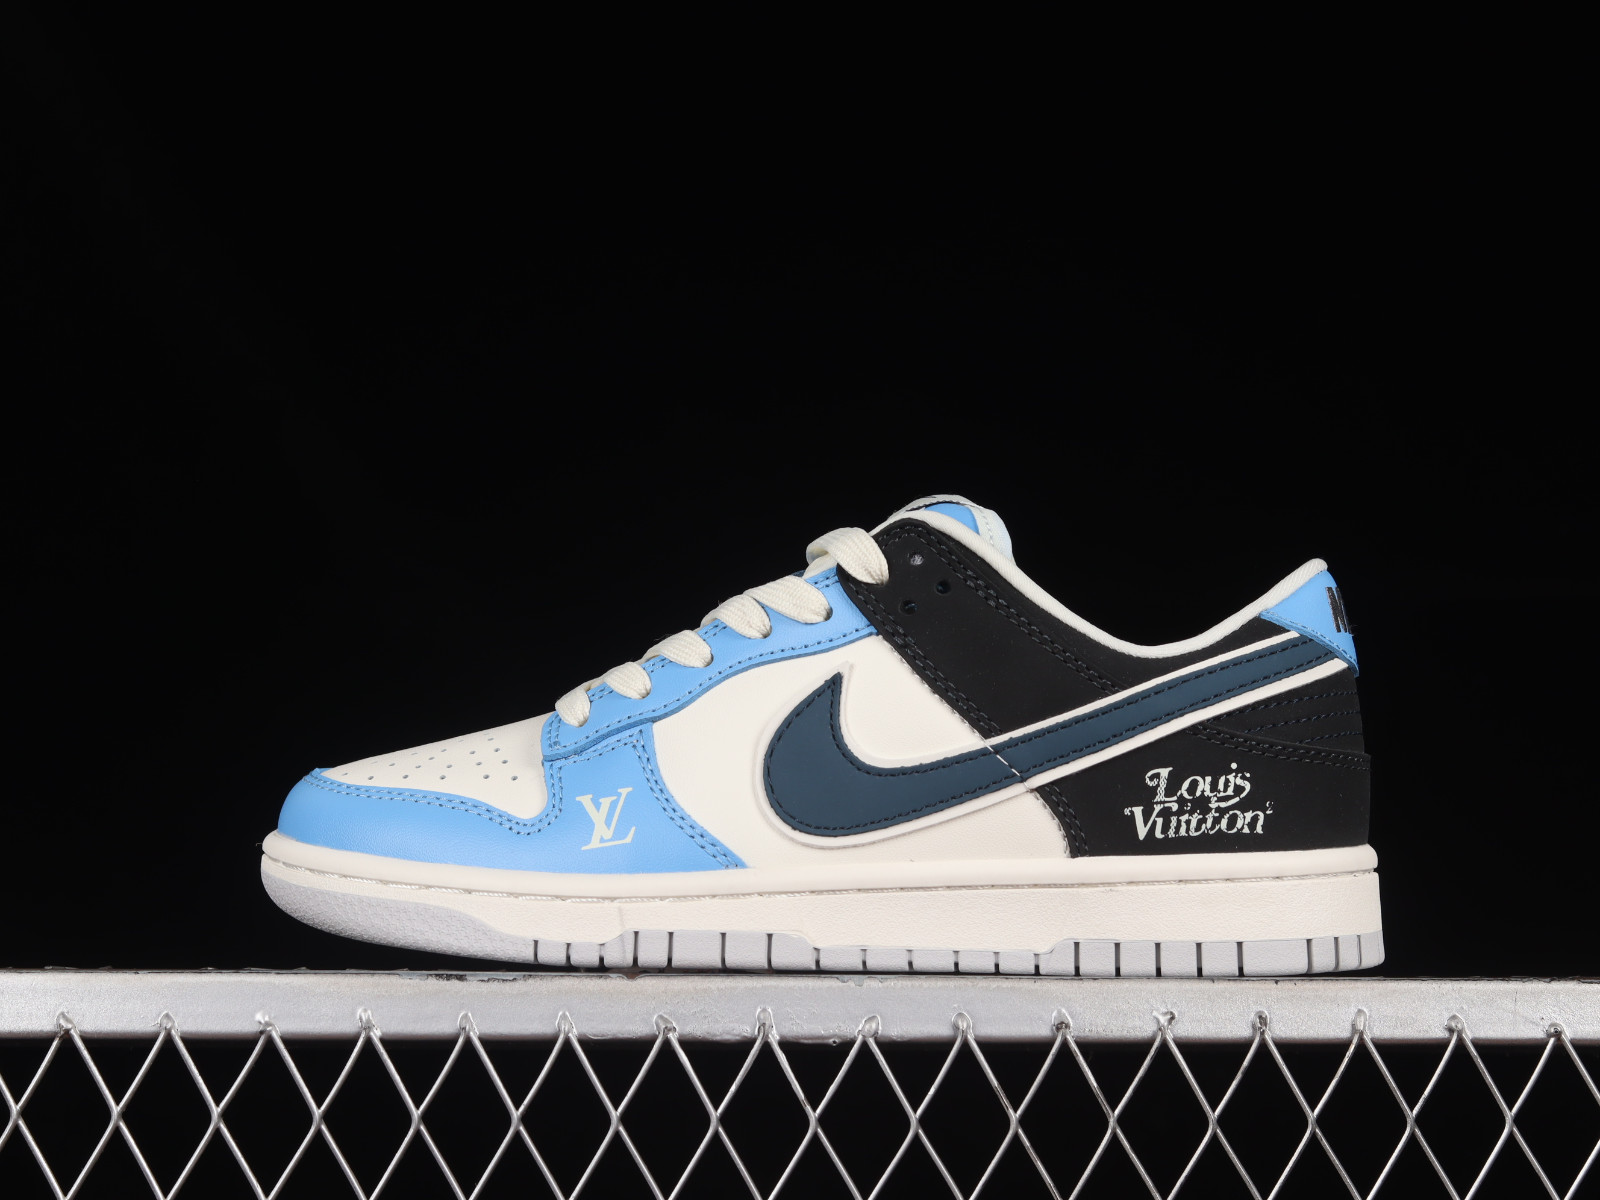 200 - MultiscaleconsultingShops - LV x Nike SB Dunk Low Navy Blue Black FC1688 - nike free hyper cheer shoe size guide